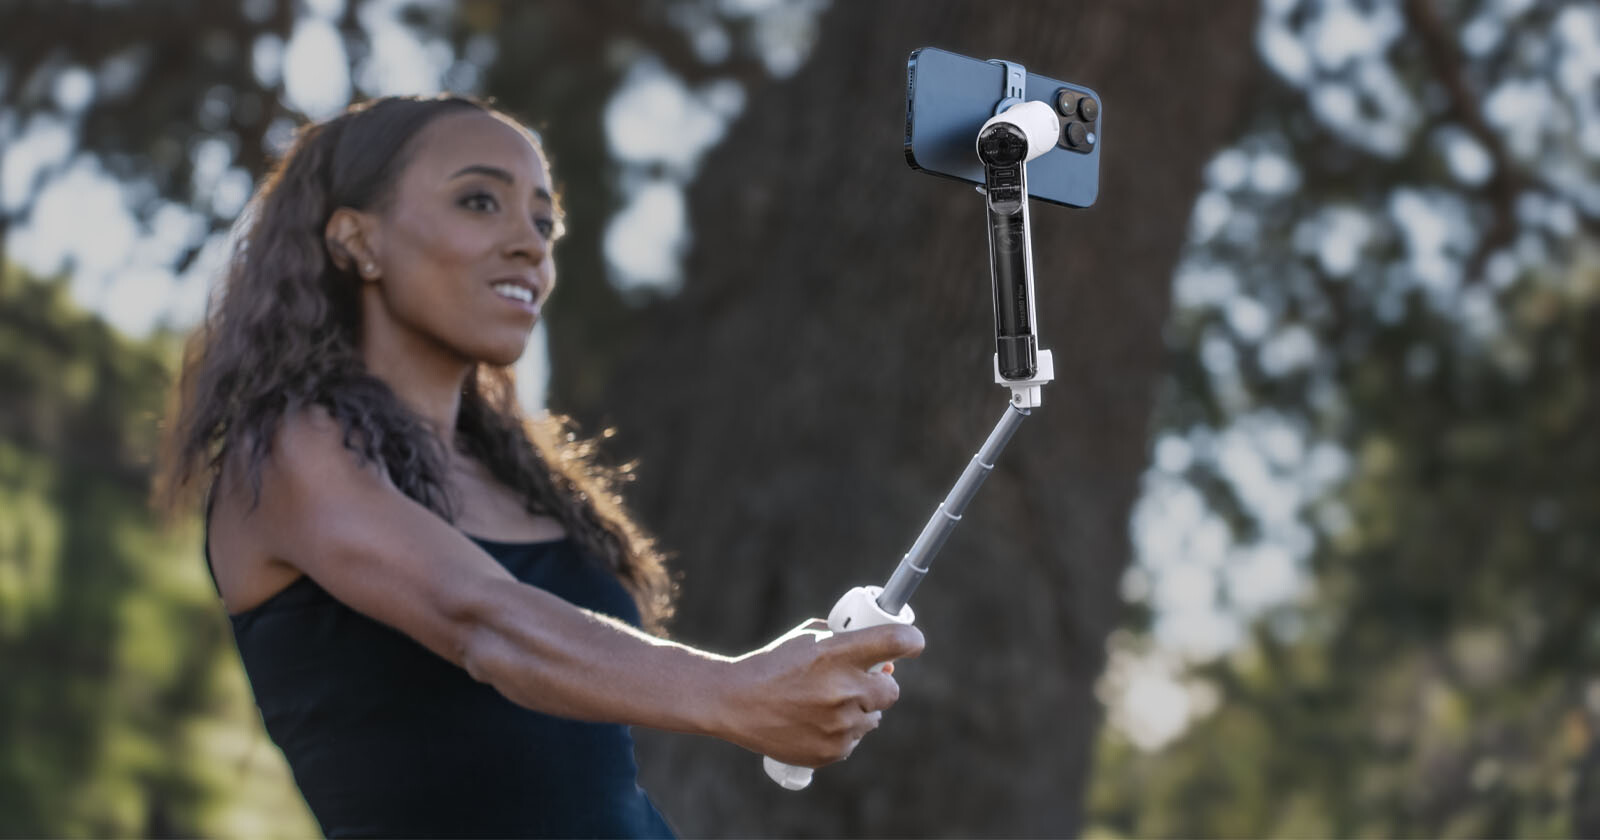 The Insta360 Flow is a Smartphone Stabilizer with AI Smarts